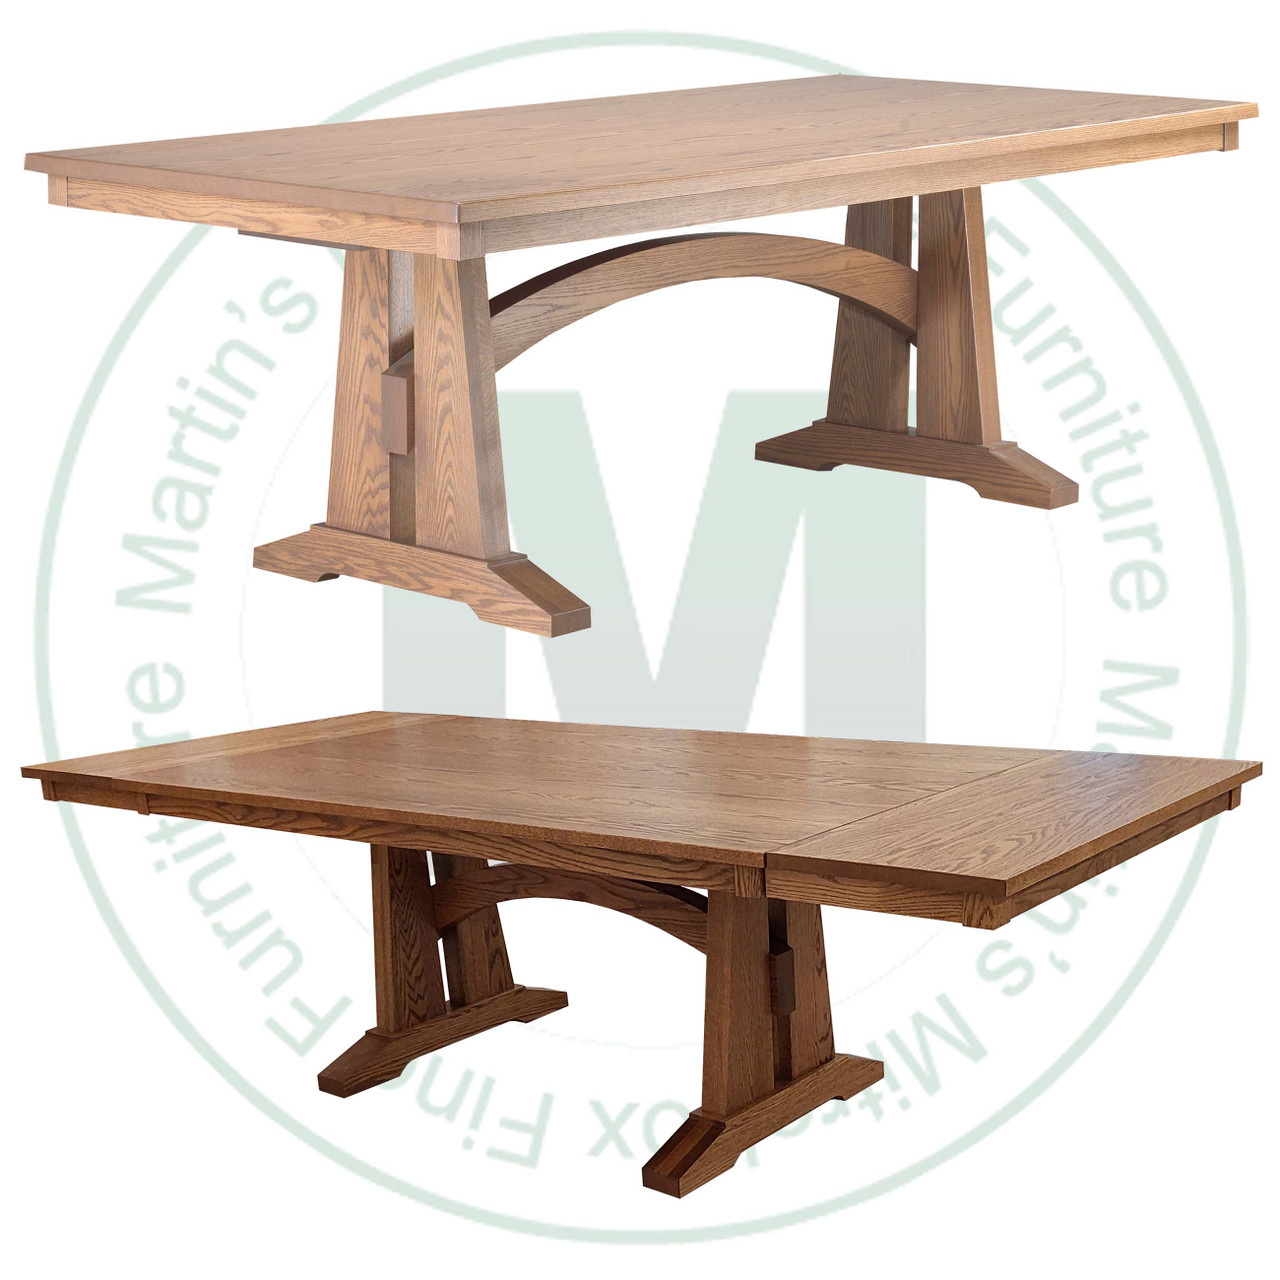 Maple Golden Gate Solid Top Pedestal Table 54''D x 96''W x 30''H And 2 - 16'' Extensions. Table Has 1.25'' Thick Top